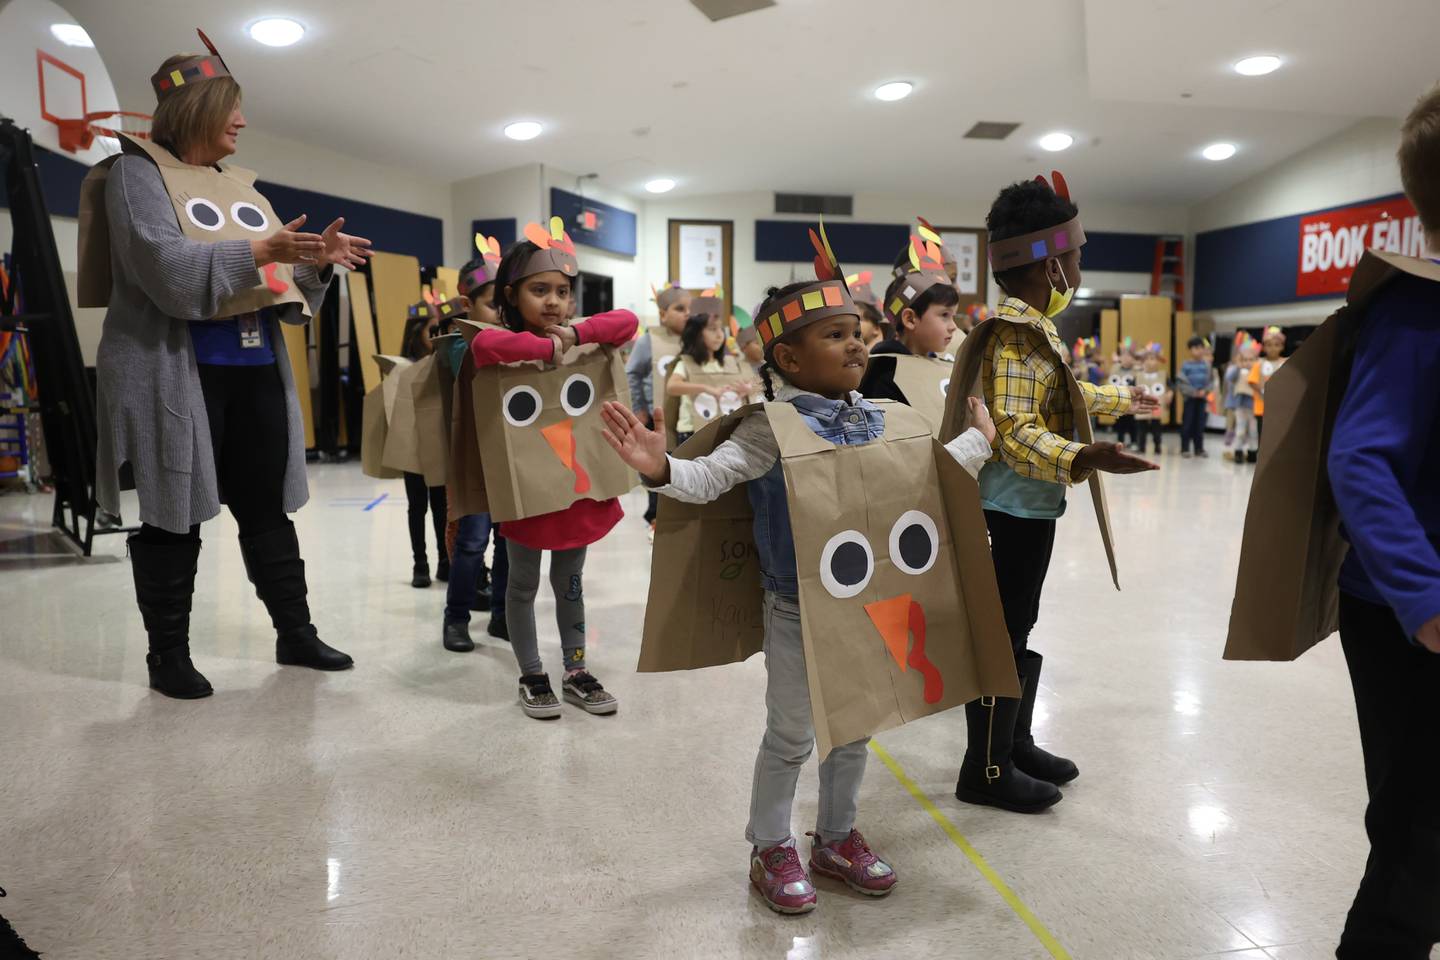 Kamea Guzman, front, leads Laura Bryll’s class in a dance during a Thanksgiving gathering at Thomas Jefferson Elementary School in Joliet on Friday.